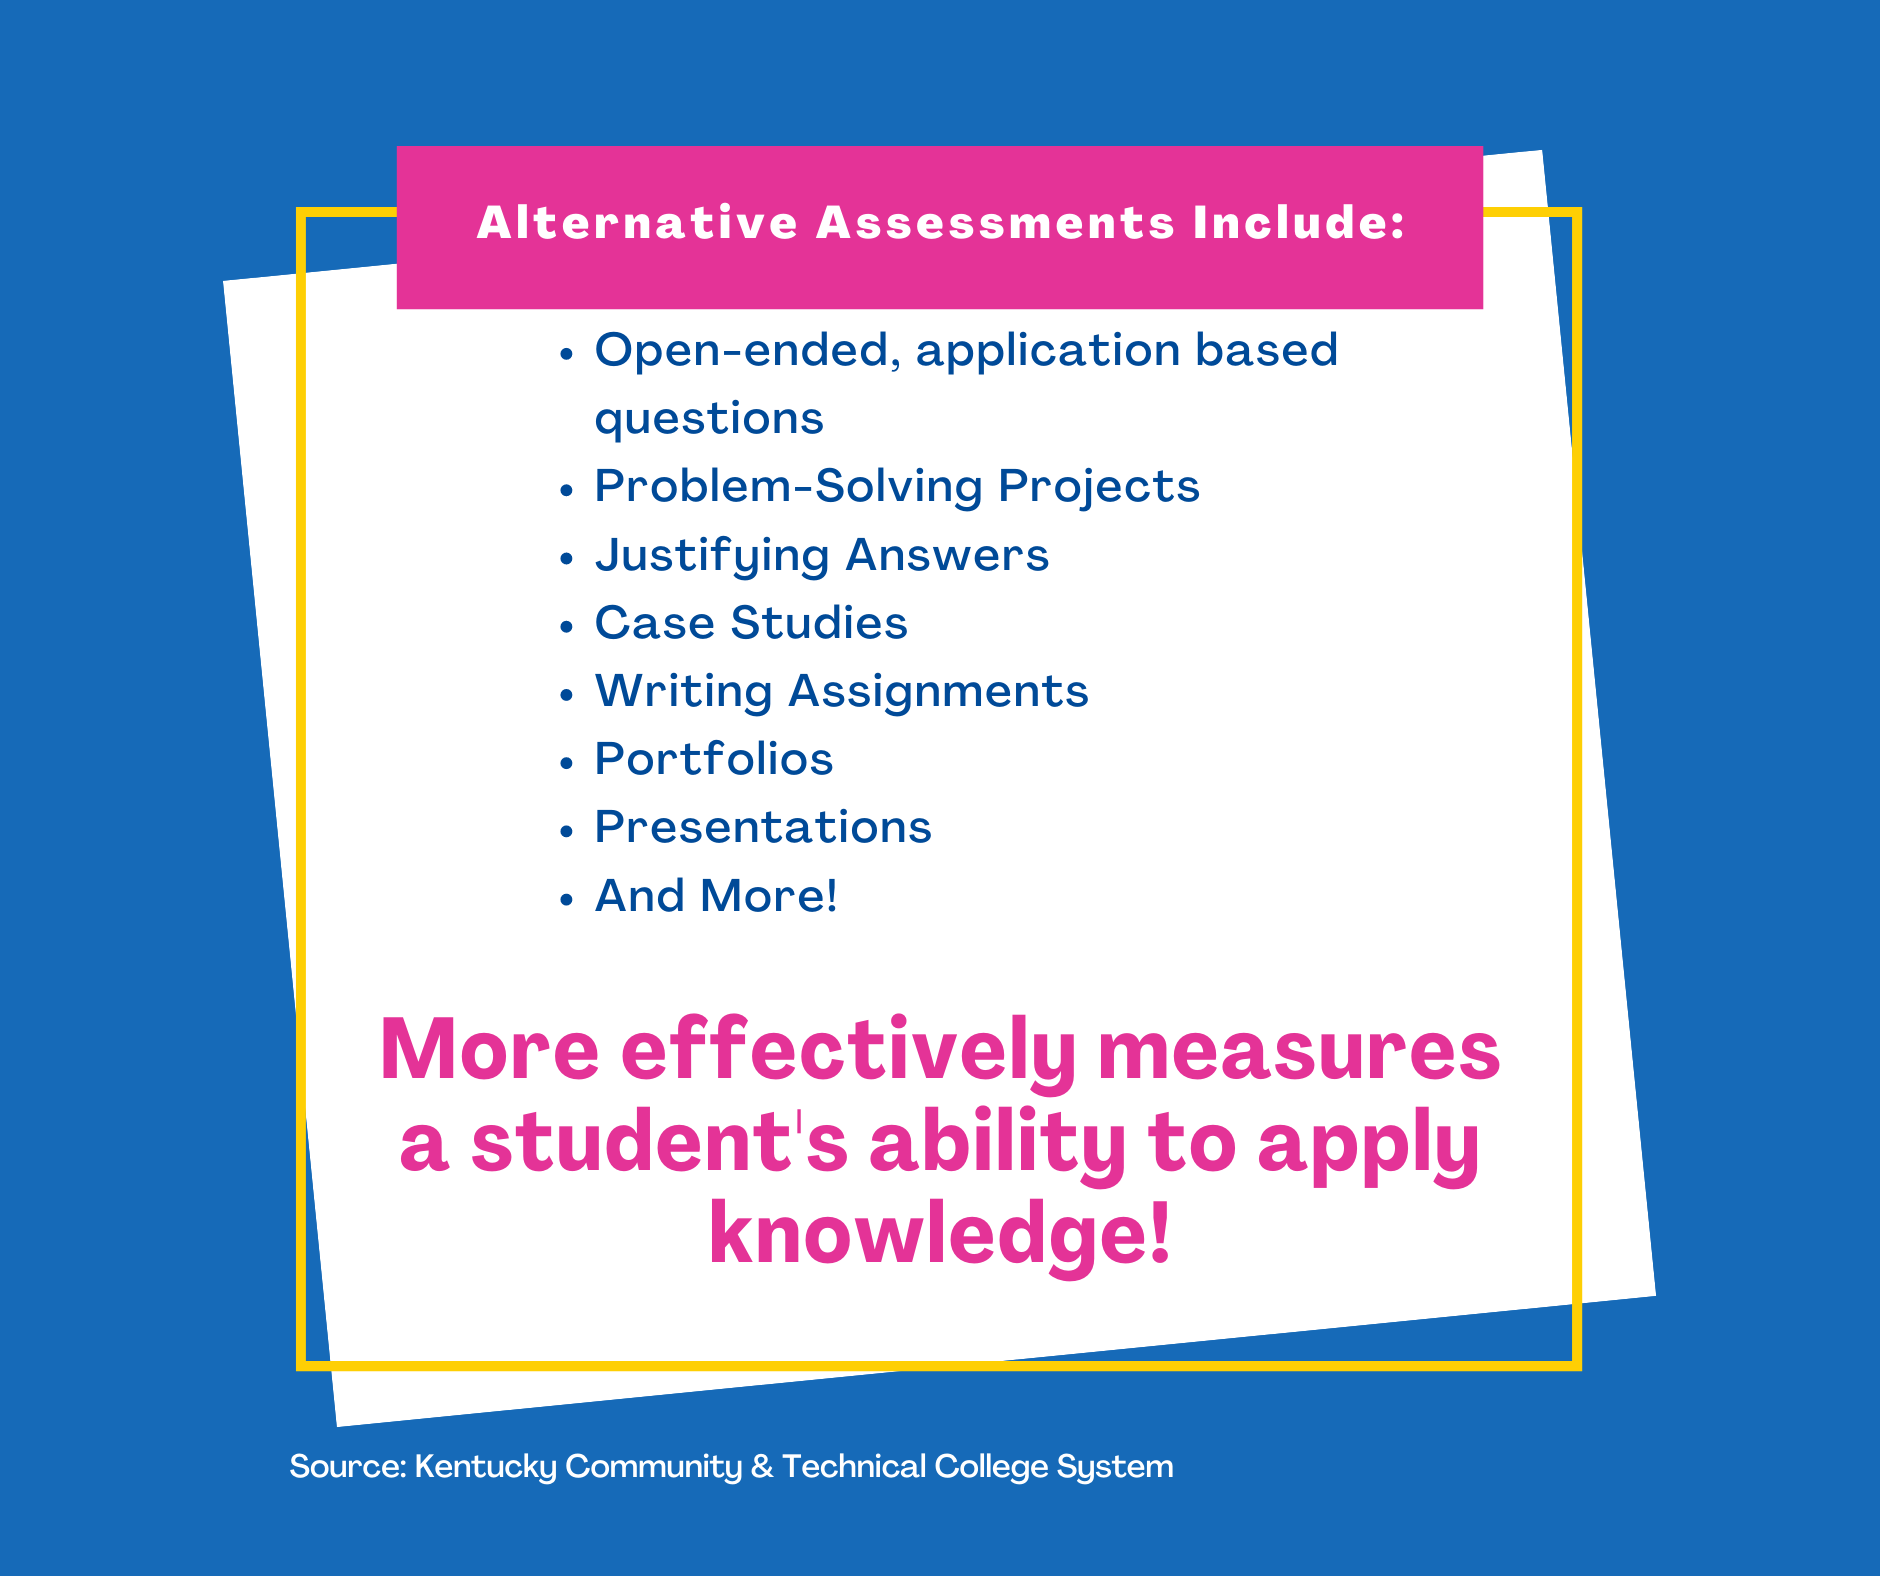 Alternative Assessments Include:

Open-ended, application based questions
Problem-Solving Projects
Justifying Answers
Case Studies
Writing Assignments
Portfolios
Presentations 
And More!
More effectively measures a student's ability to apply knowledge!
Source: Kentucky Community & Technical College System